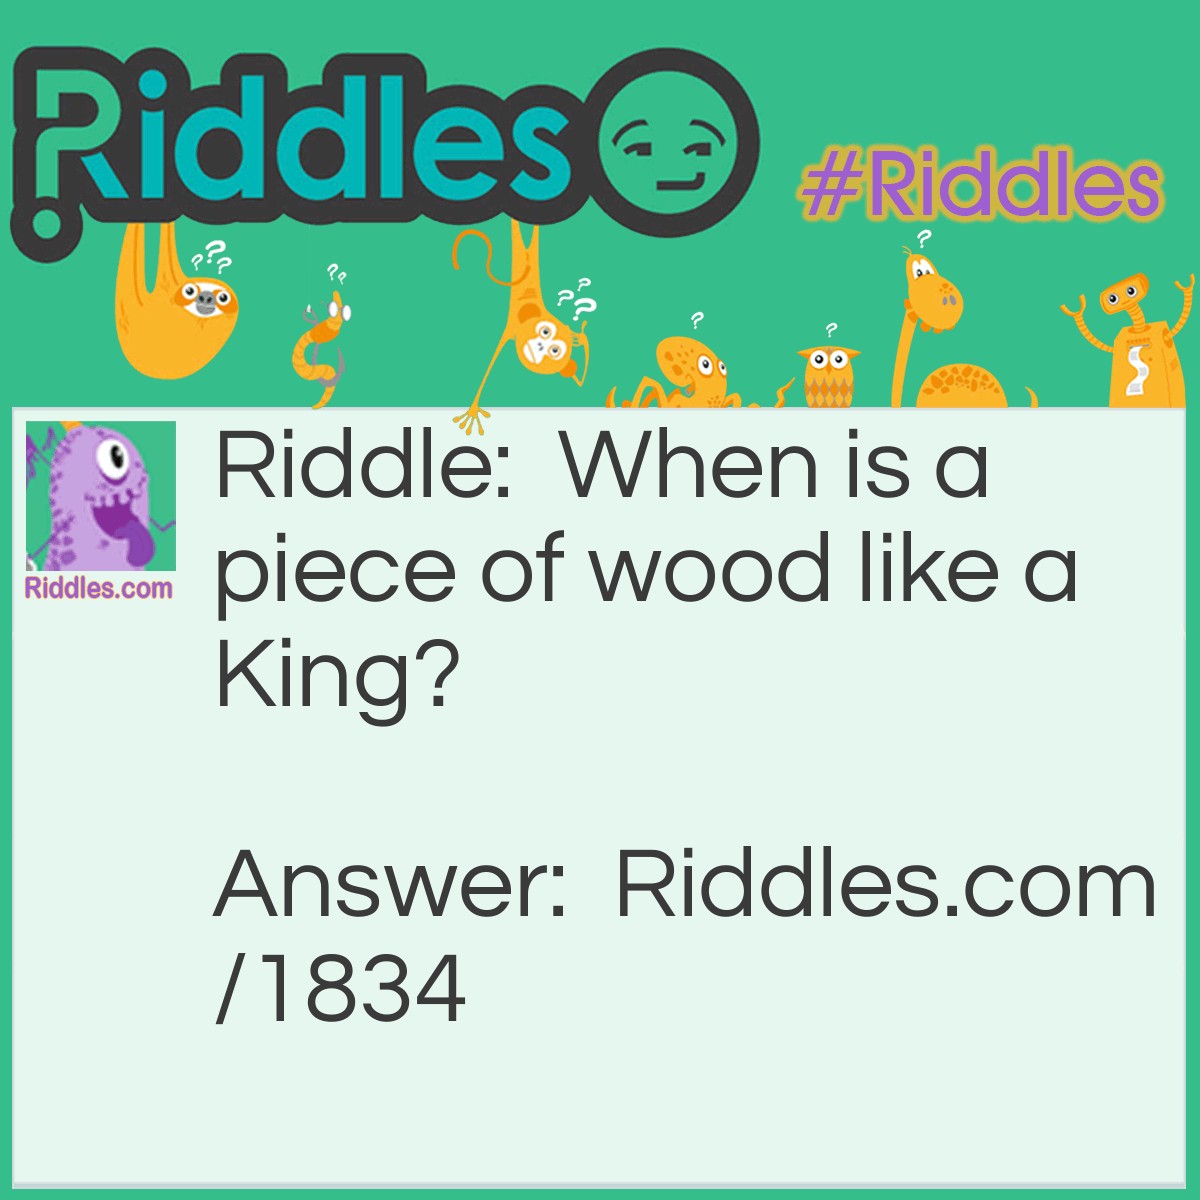 Riddle: When is a piece of wood like a King? Answer: When it is made into a ruler.